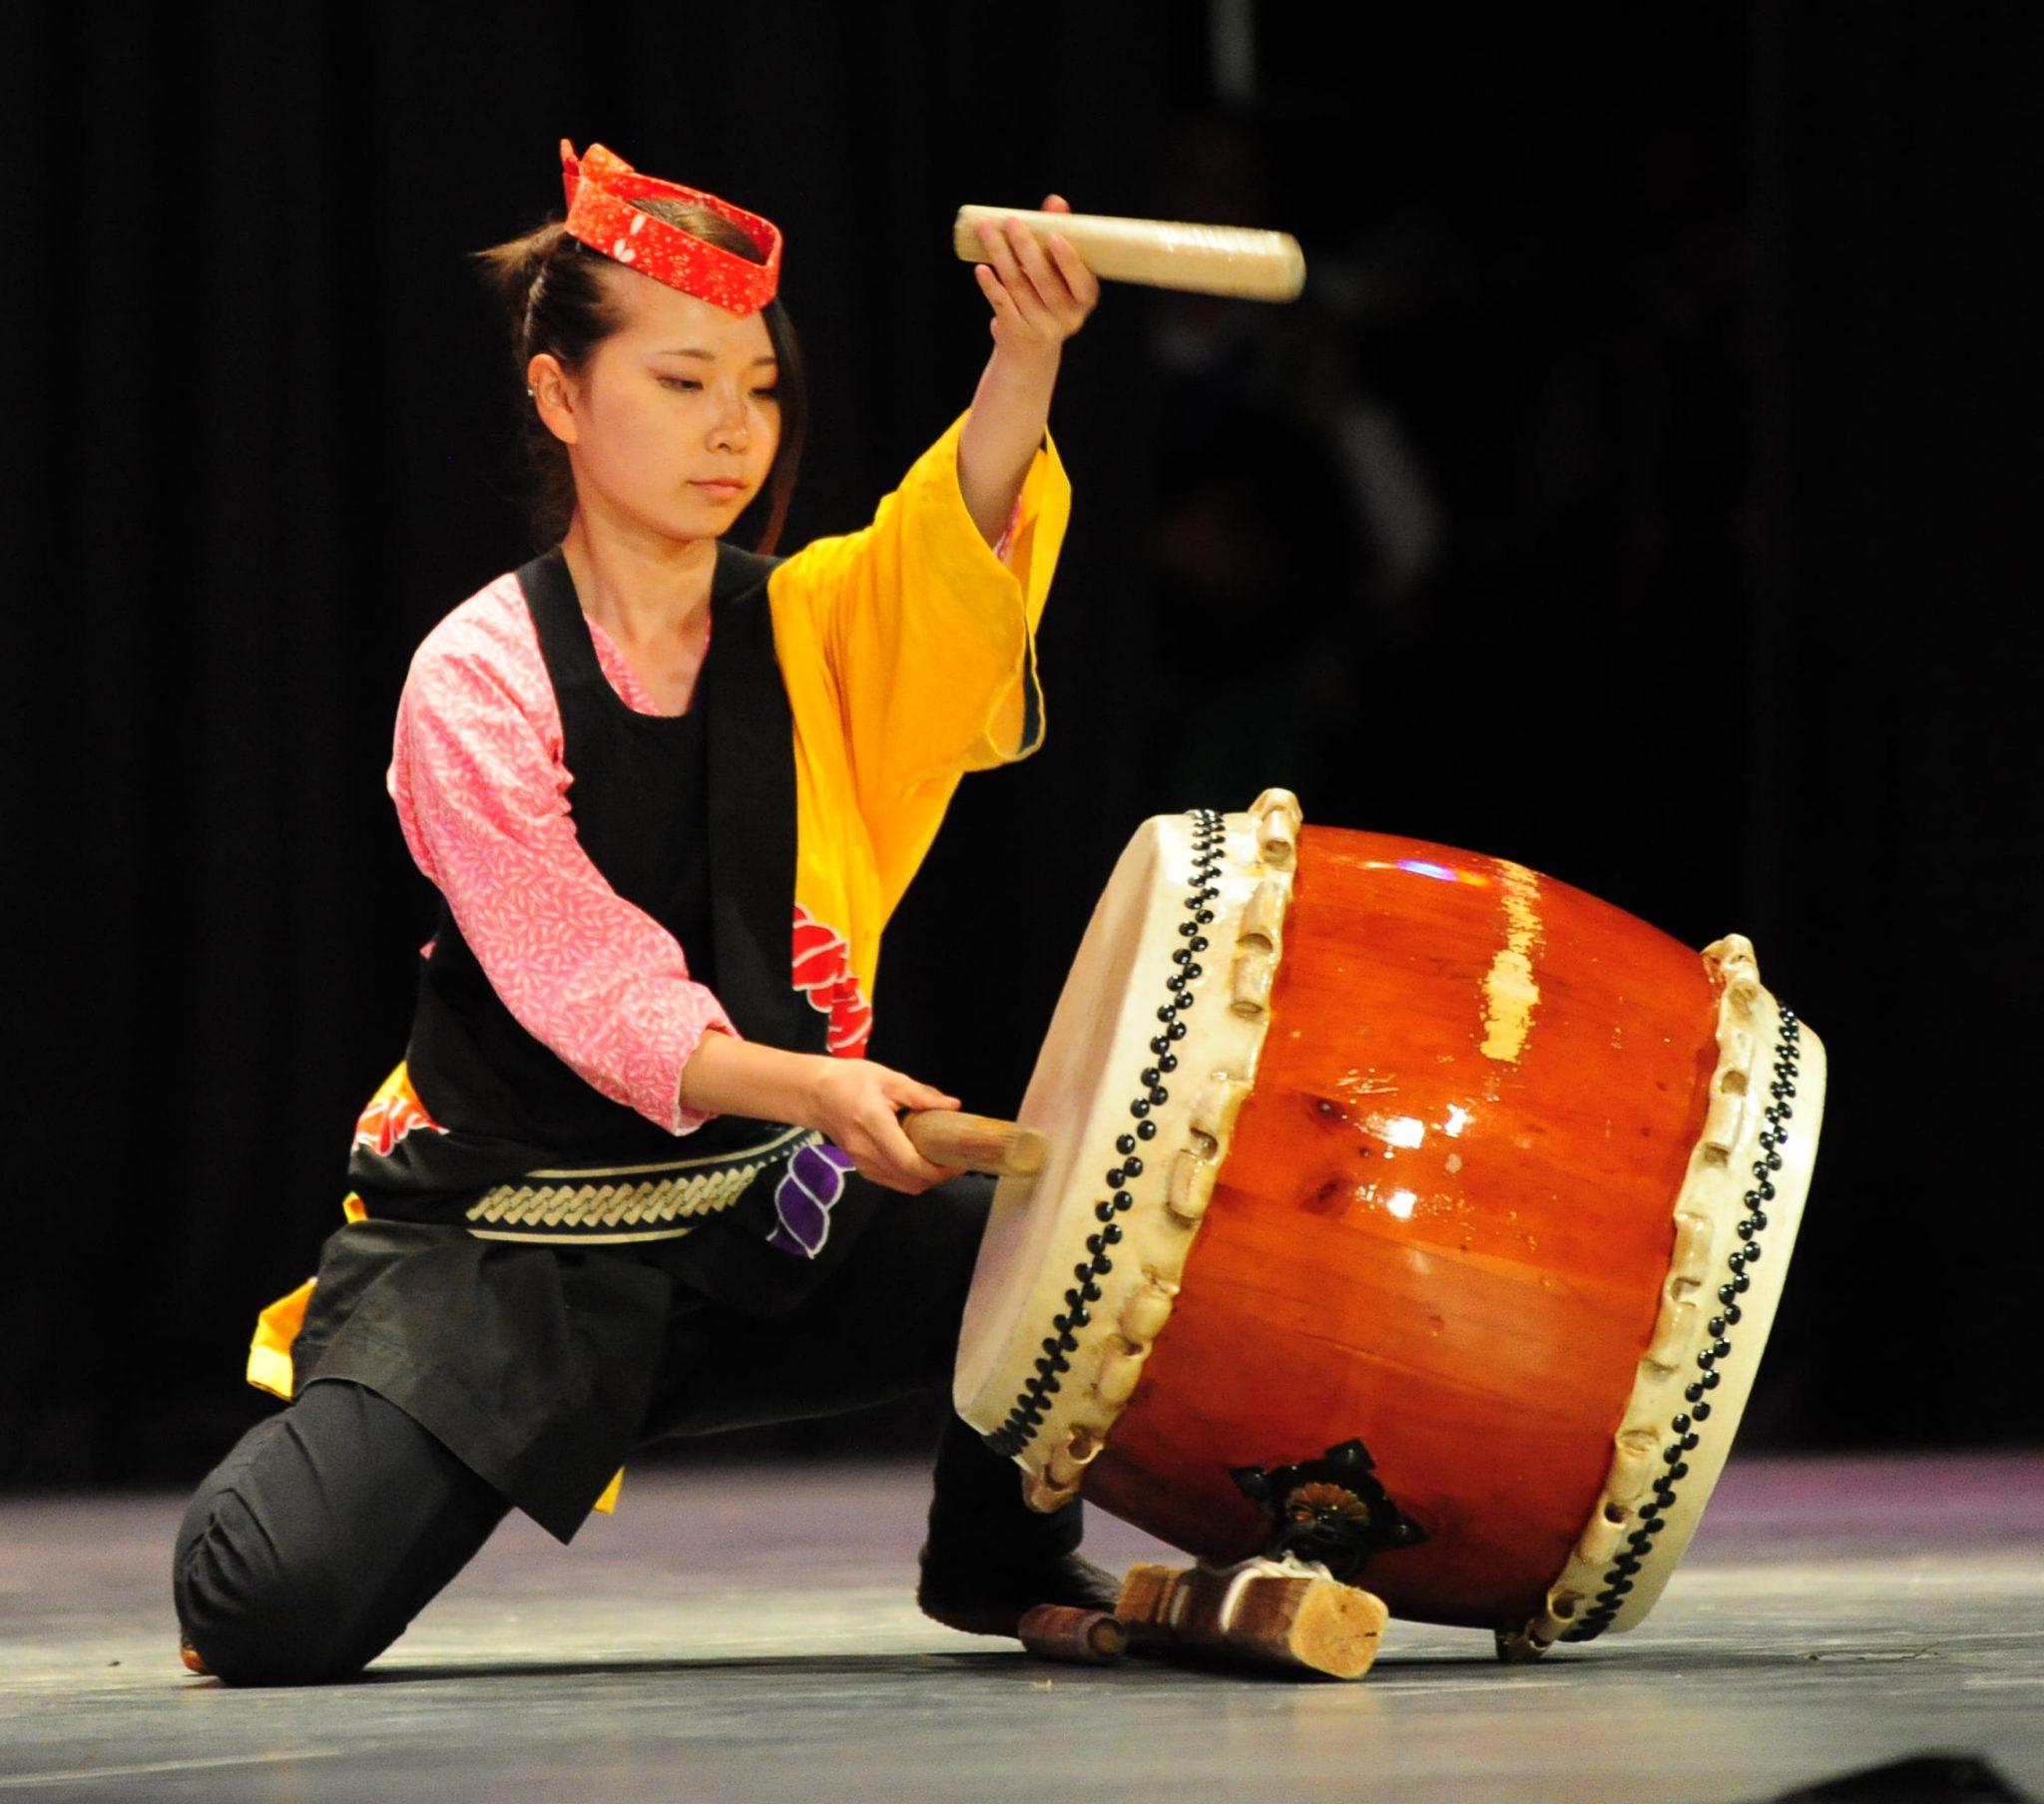 Musicians and dancers from Japan perform at Folkmoot 2016. Photo by Patrick Parton.